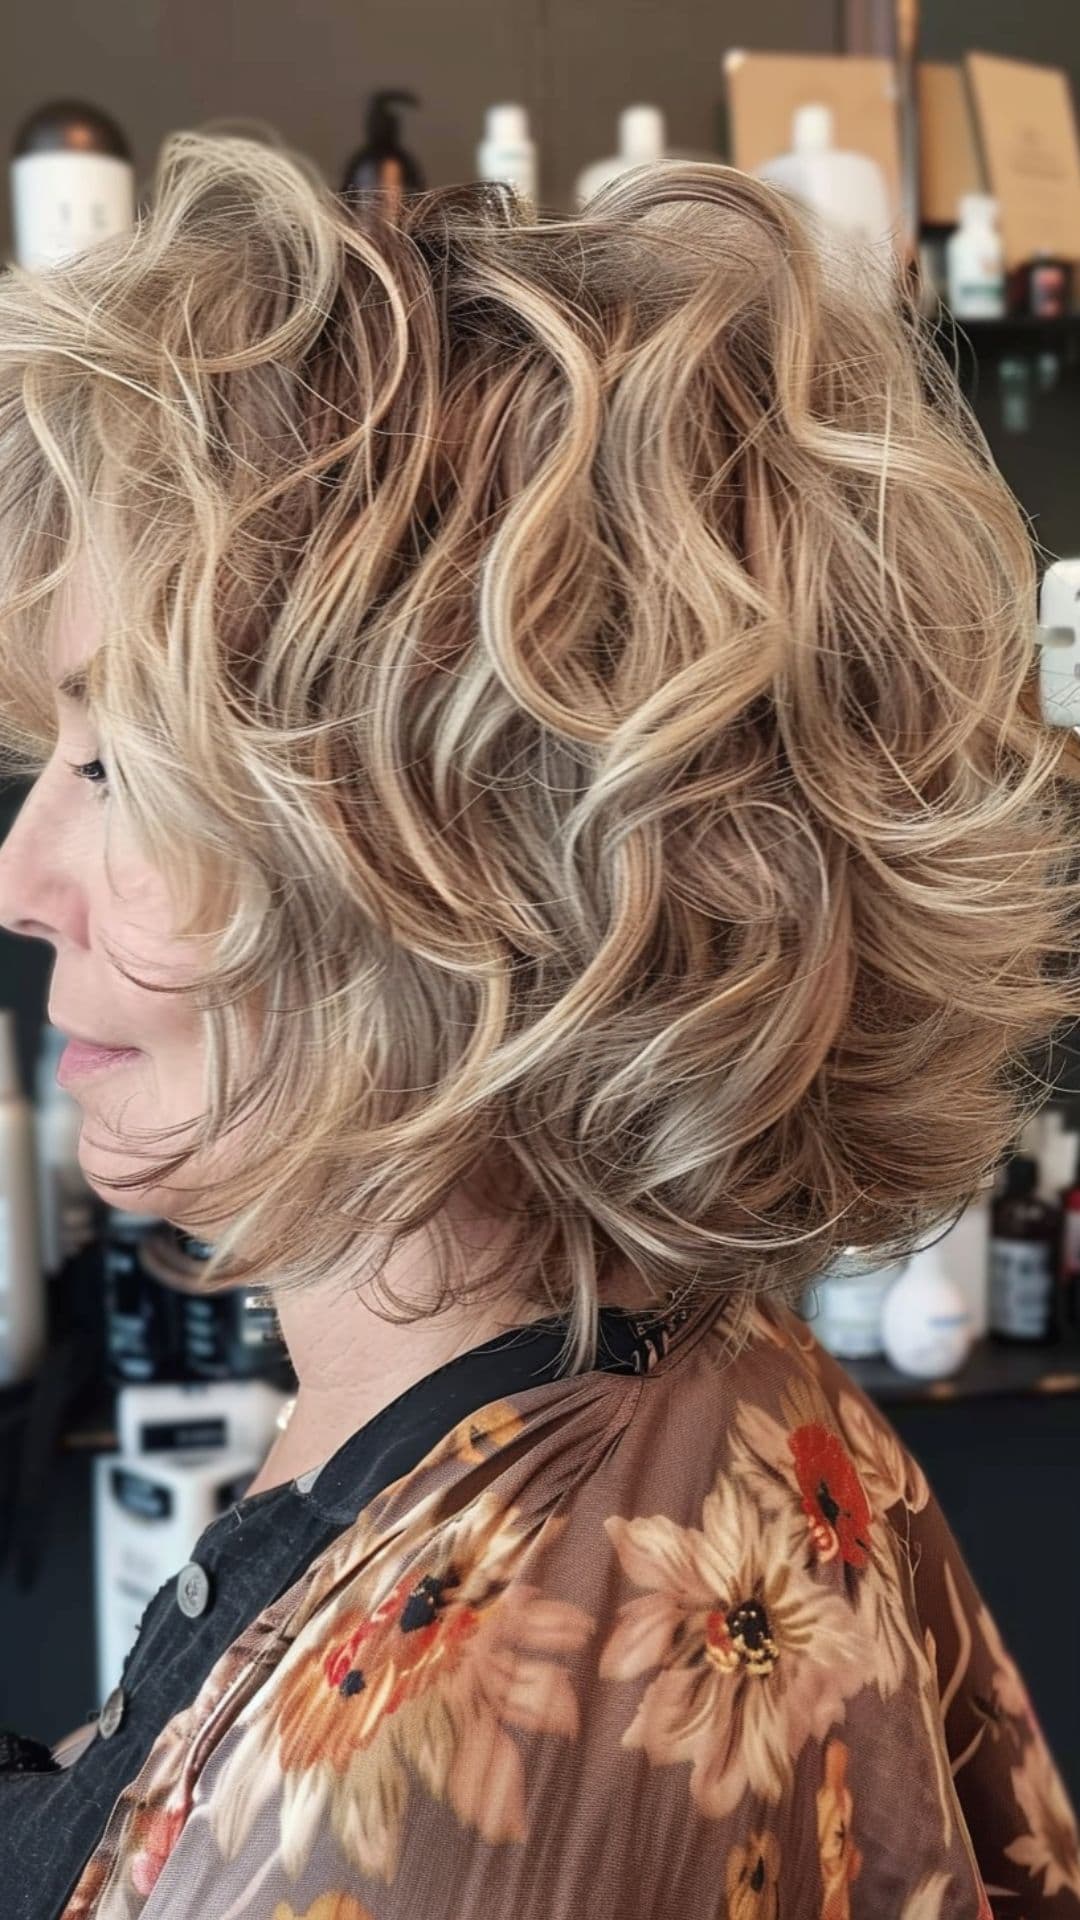 An old woman modelling a layered bob with dimensional highlights.